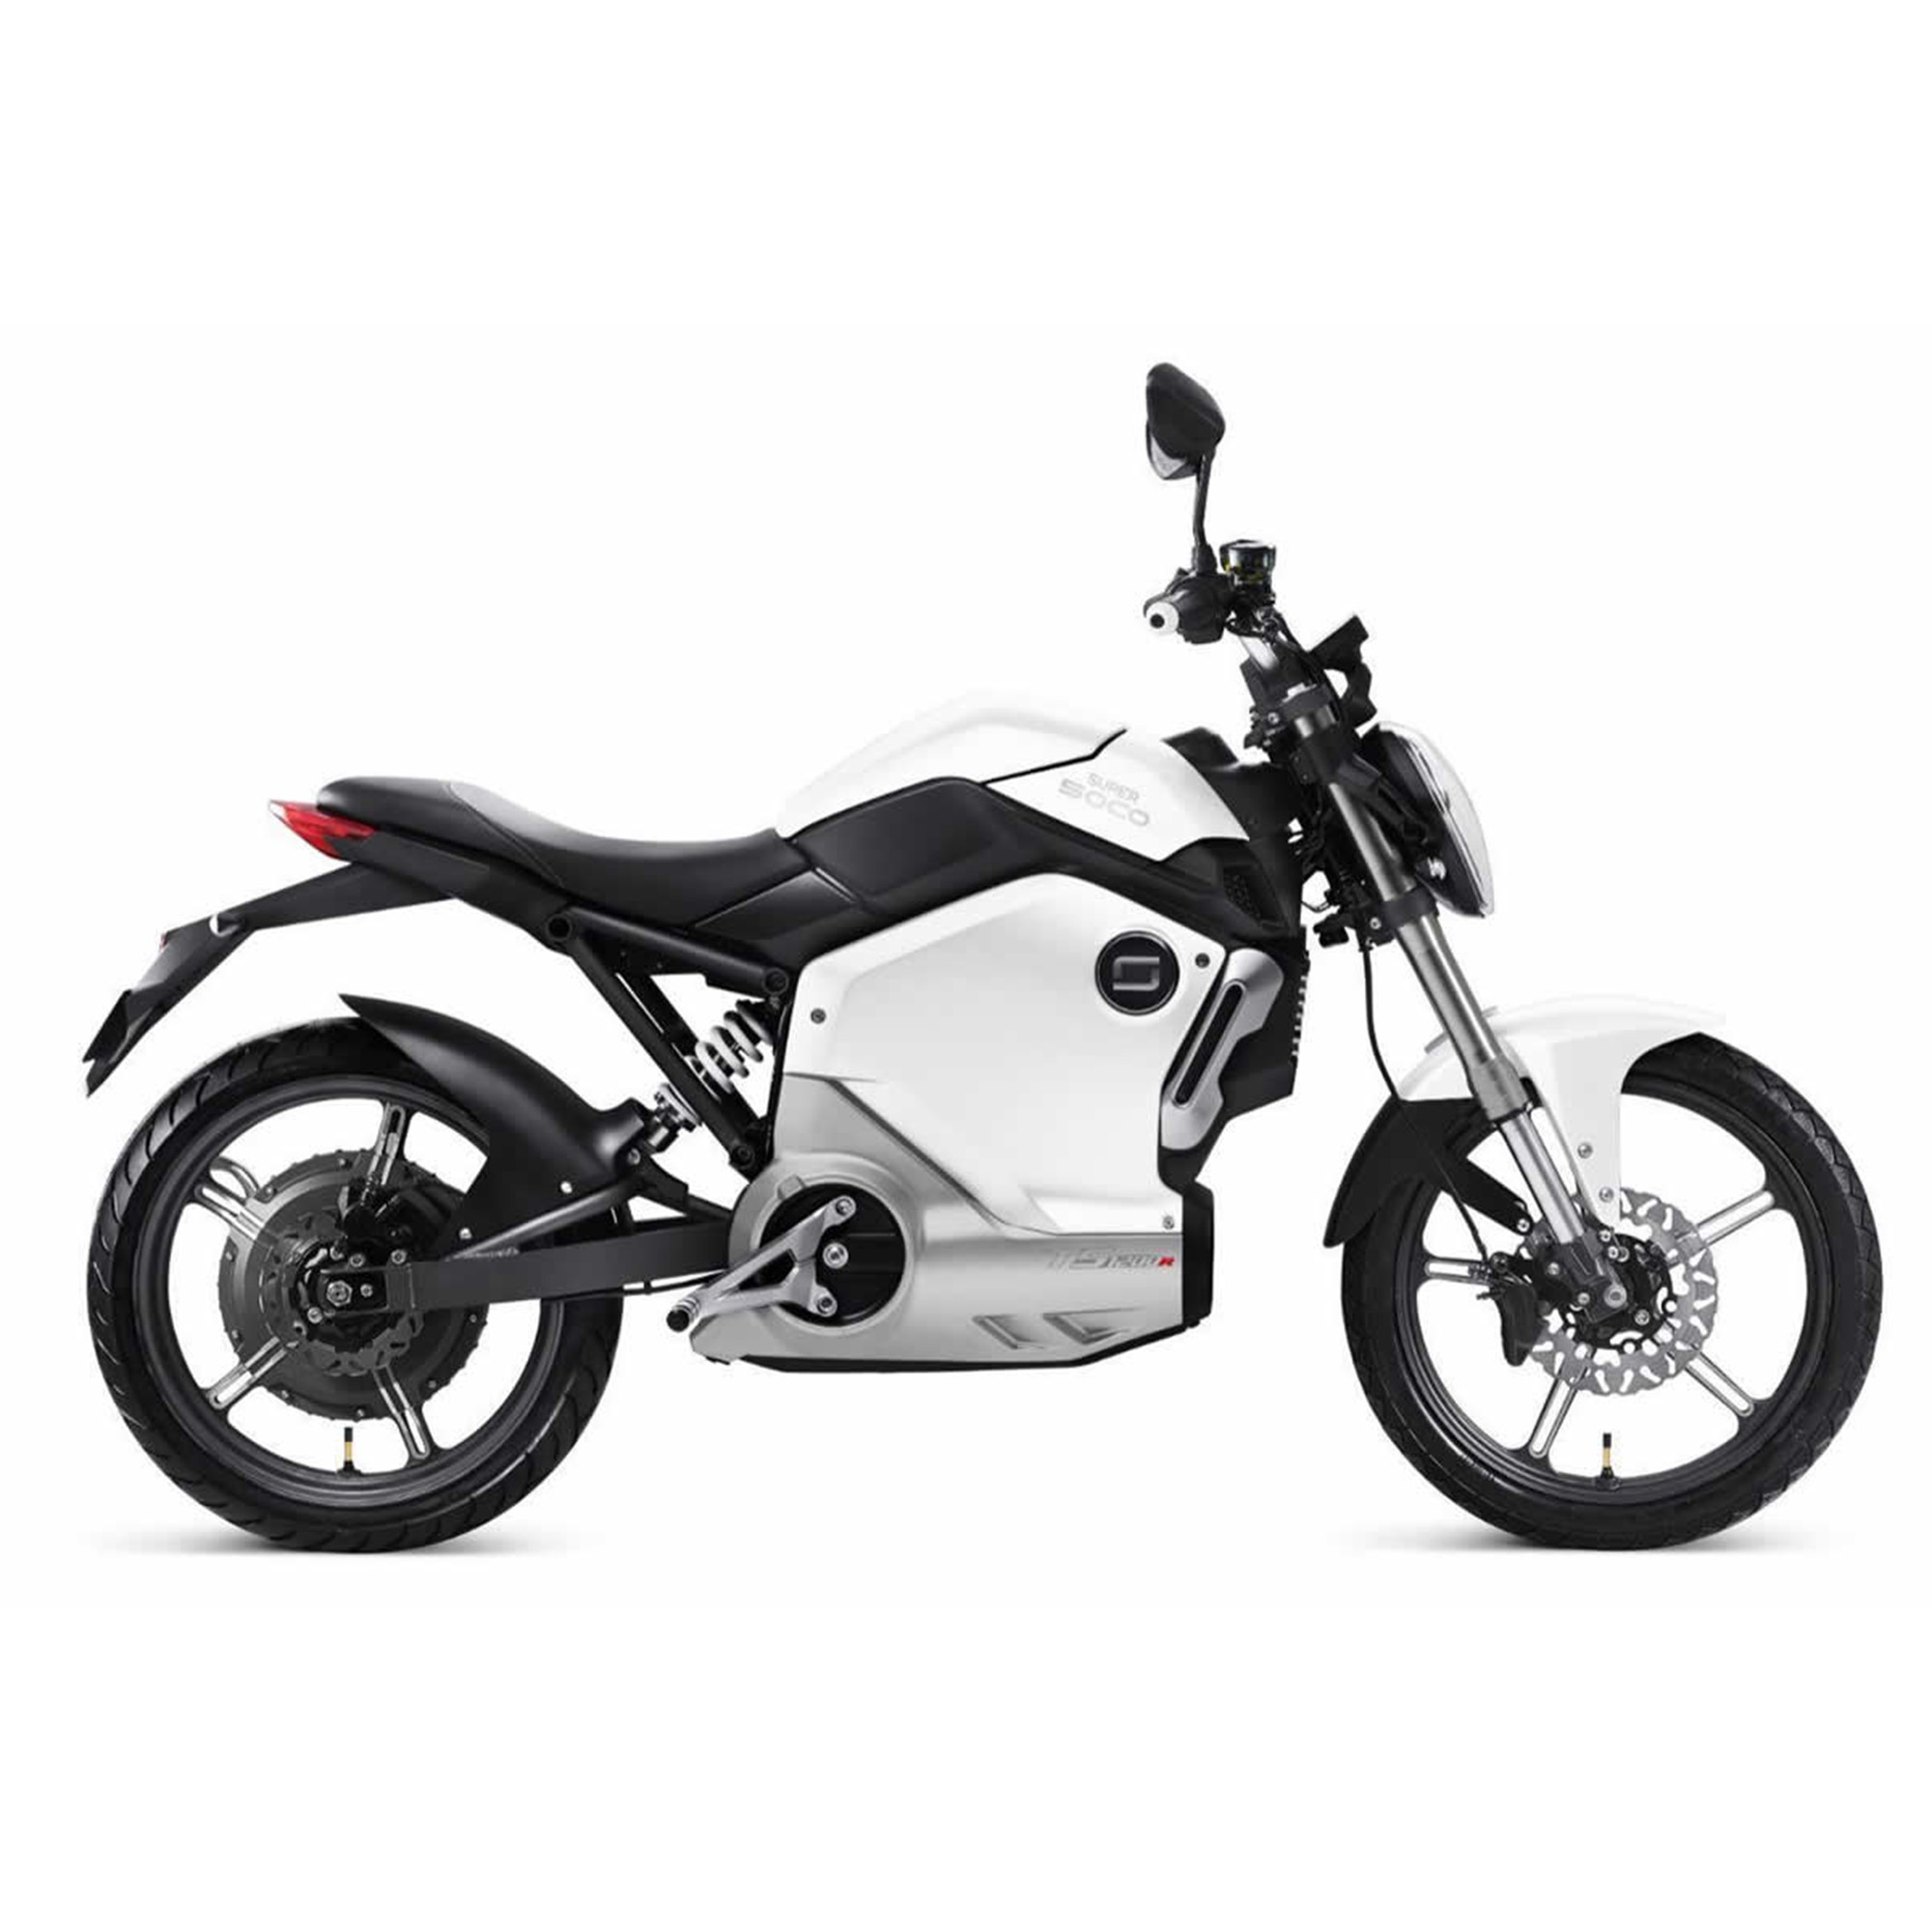 NOITAVONNE EBIKE CONCORDE - WHITE - Sleek, Performance Packed, And Eco-friendly, The Noitavonne E-bike Delivers On Every Level. Getting 55 Miles/charge And A Top Speed Of 35 Mph, The Need For Obtaining A Motorcycle Licence Is Not Required.